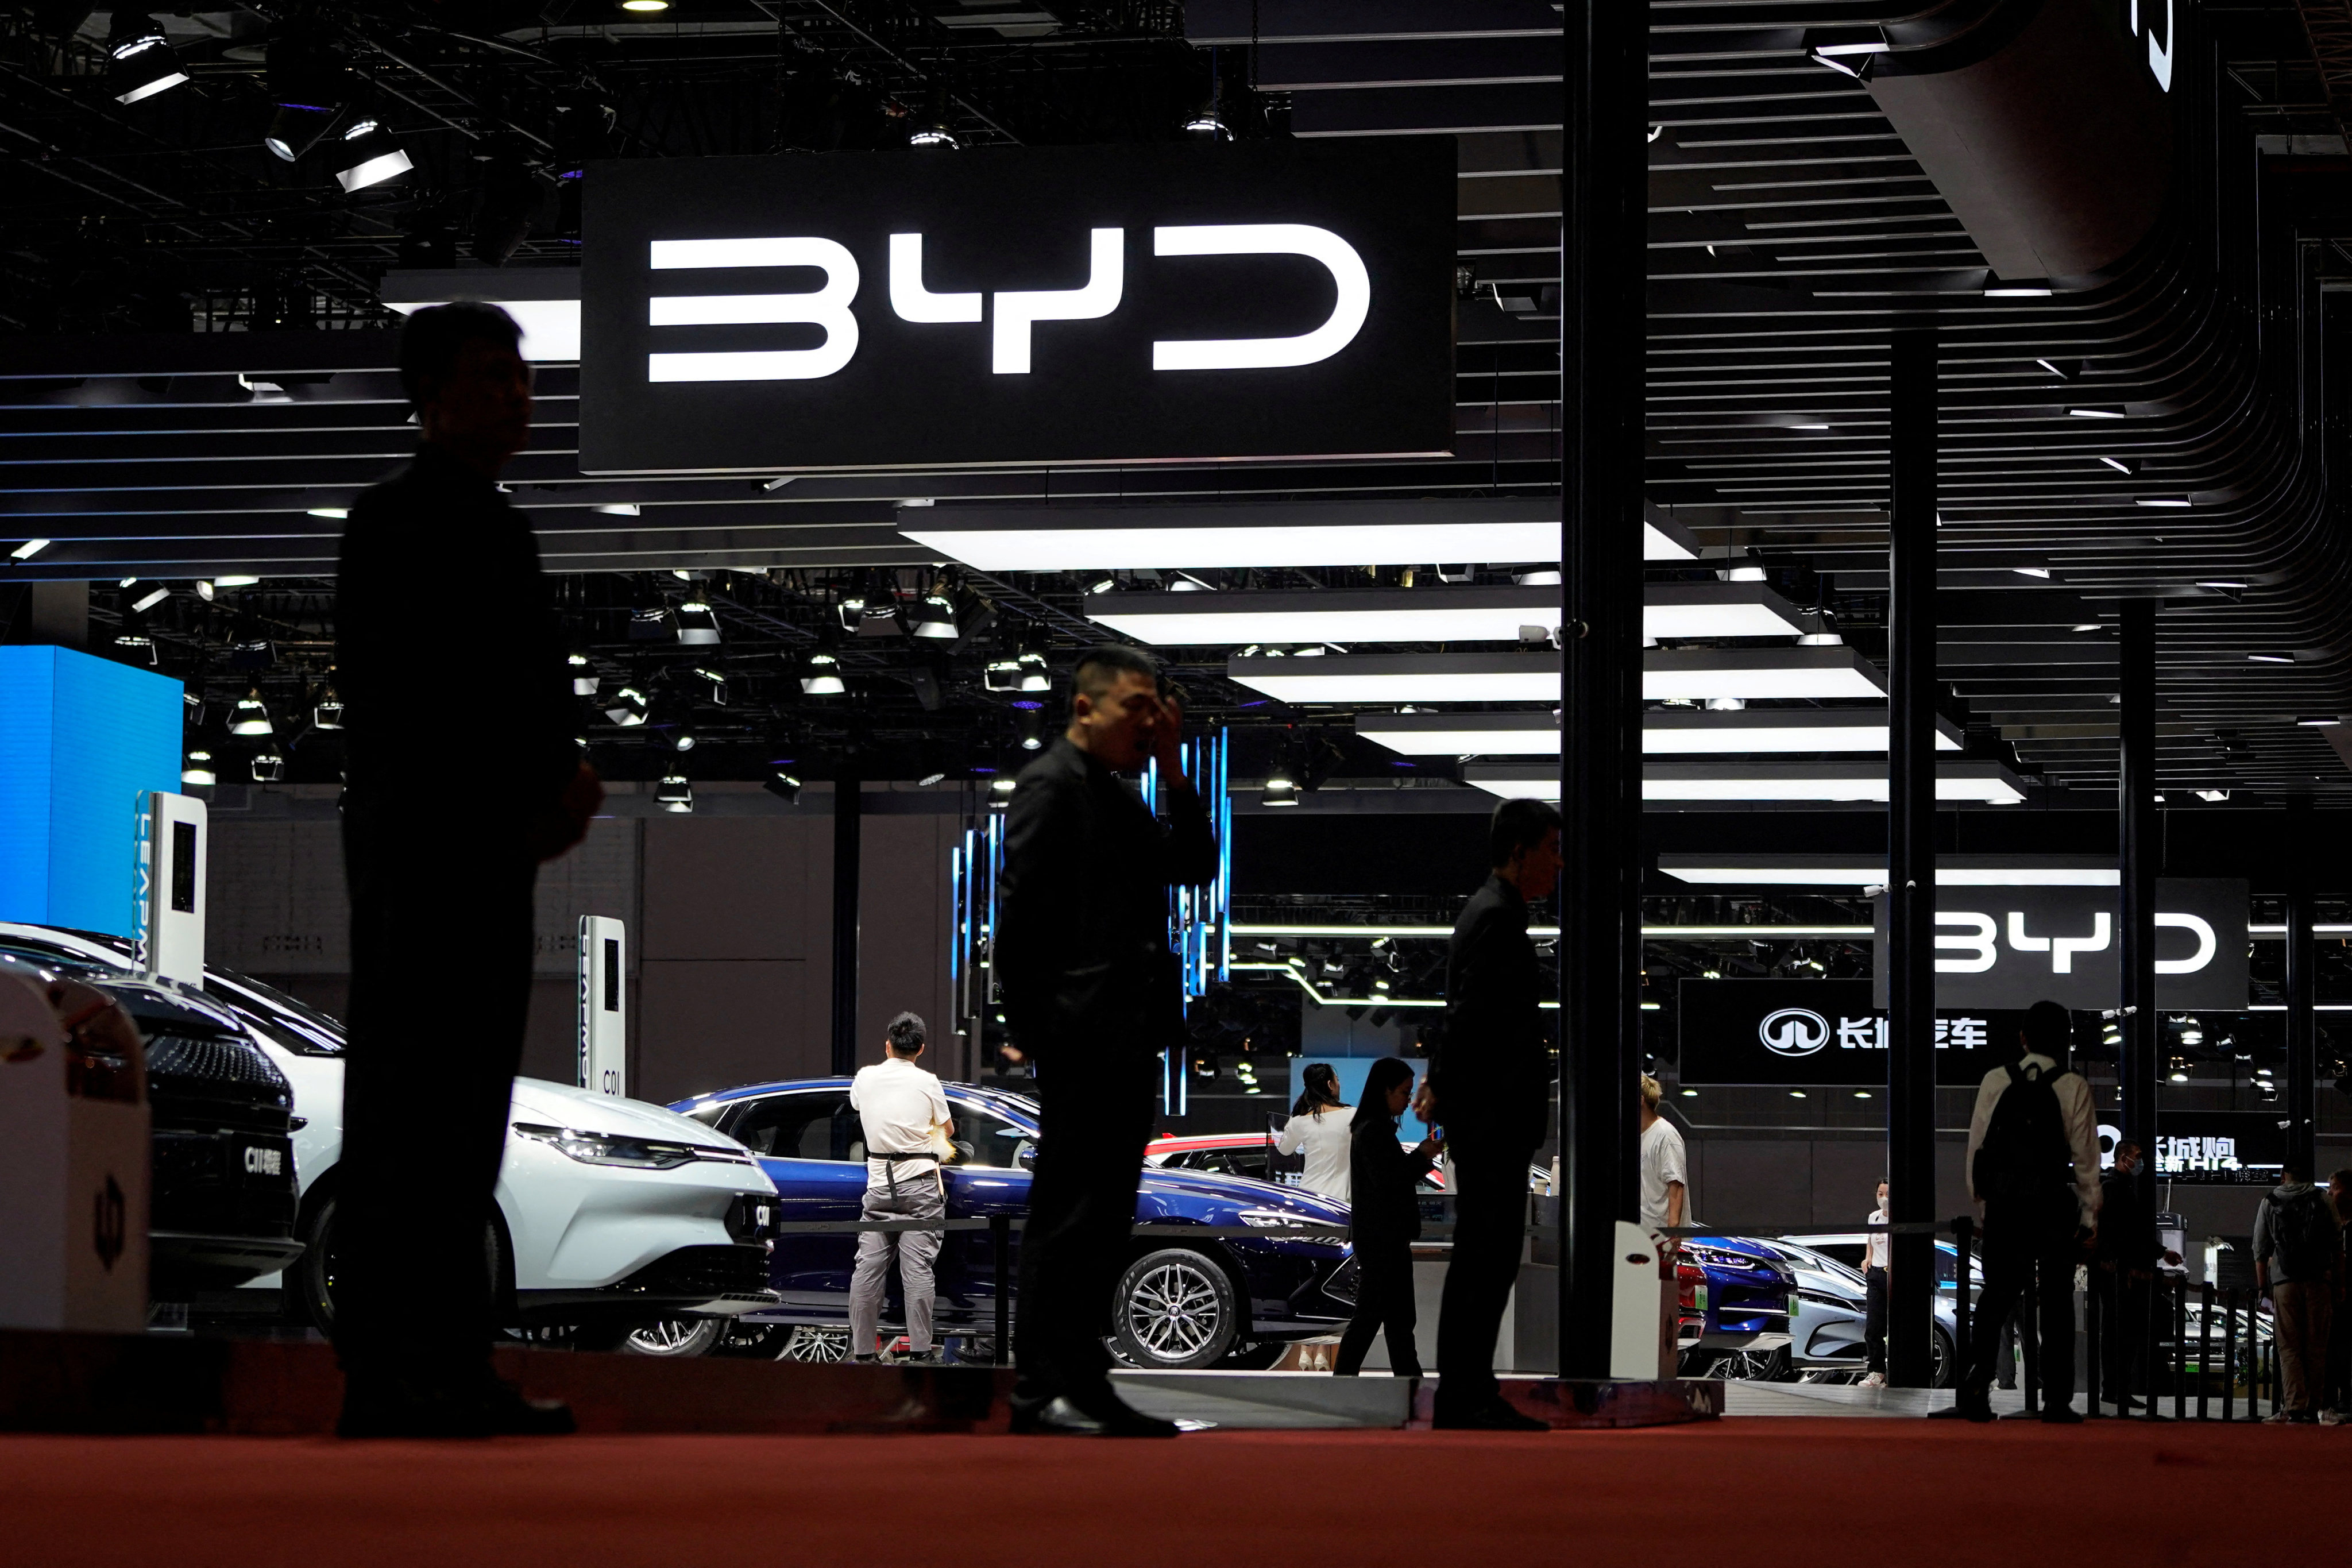 Security guards stand at the BYD booth at the Shanghai auto show, on April 19. In a 2023 ranking of top auto brands, China’s flag-bearer BYD is ranked 12th, the only Chinese carmaker in the top 20. Photo: Reuters